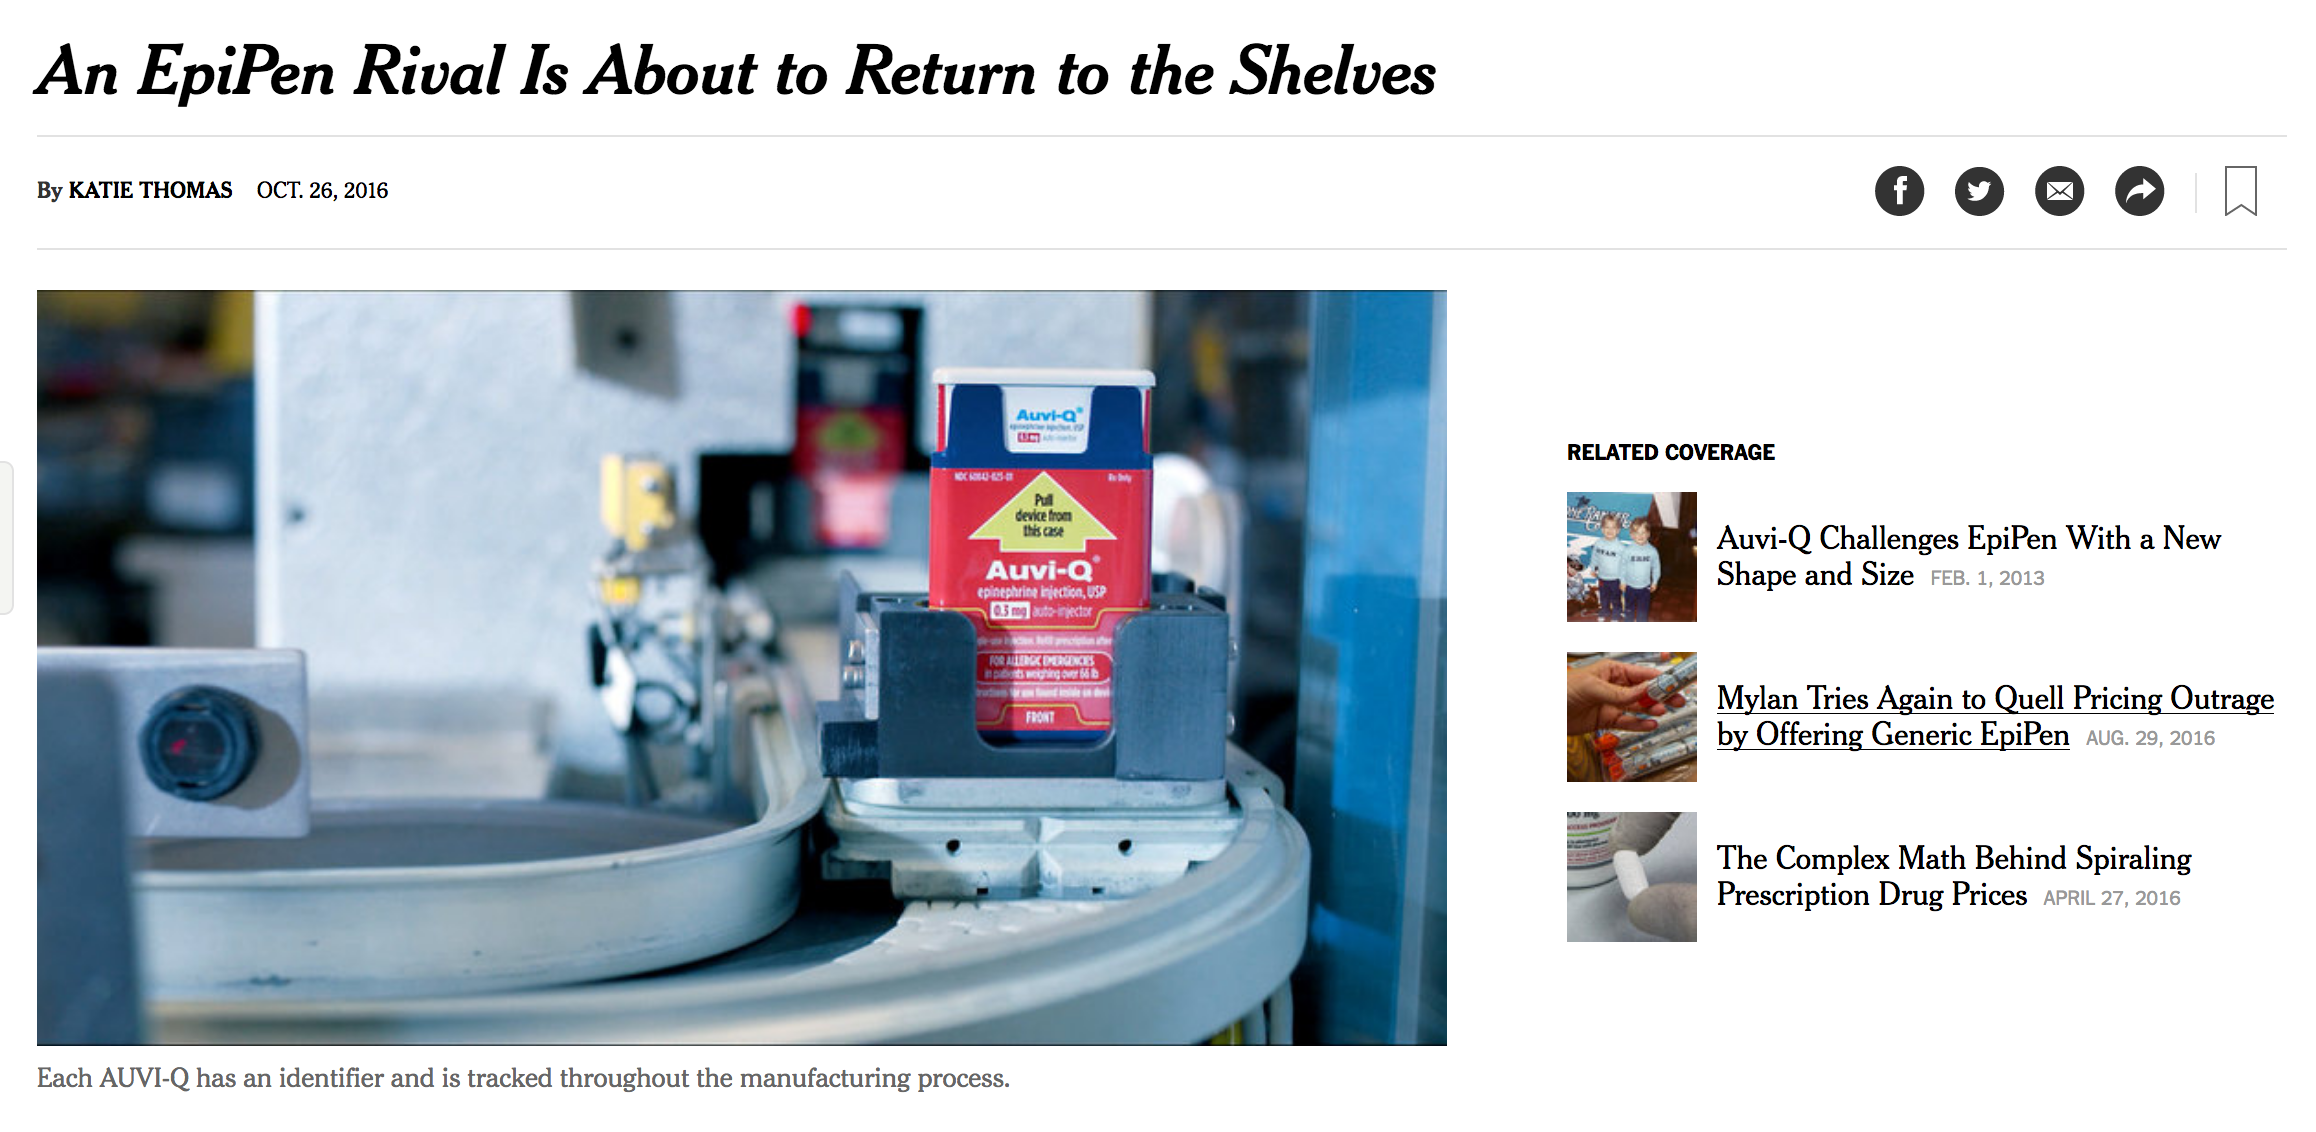  An example article opener from <a href='http://www.nytimes.com/2016/10/27/business/an-epipen-rival-is-about-to-return-to-the-shelves.html?ref=business&_r=0' target='_blank'>The New York Times.</a> 